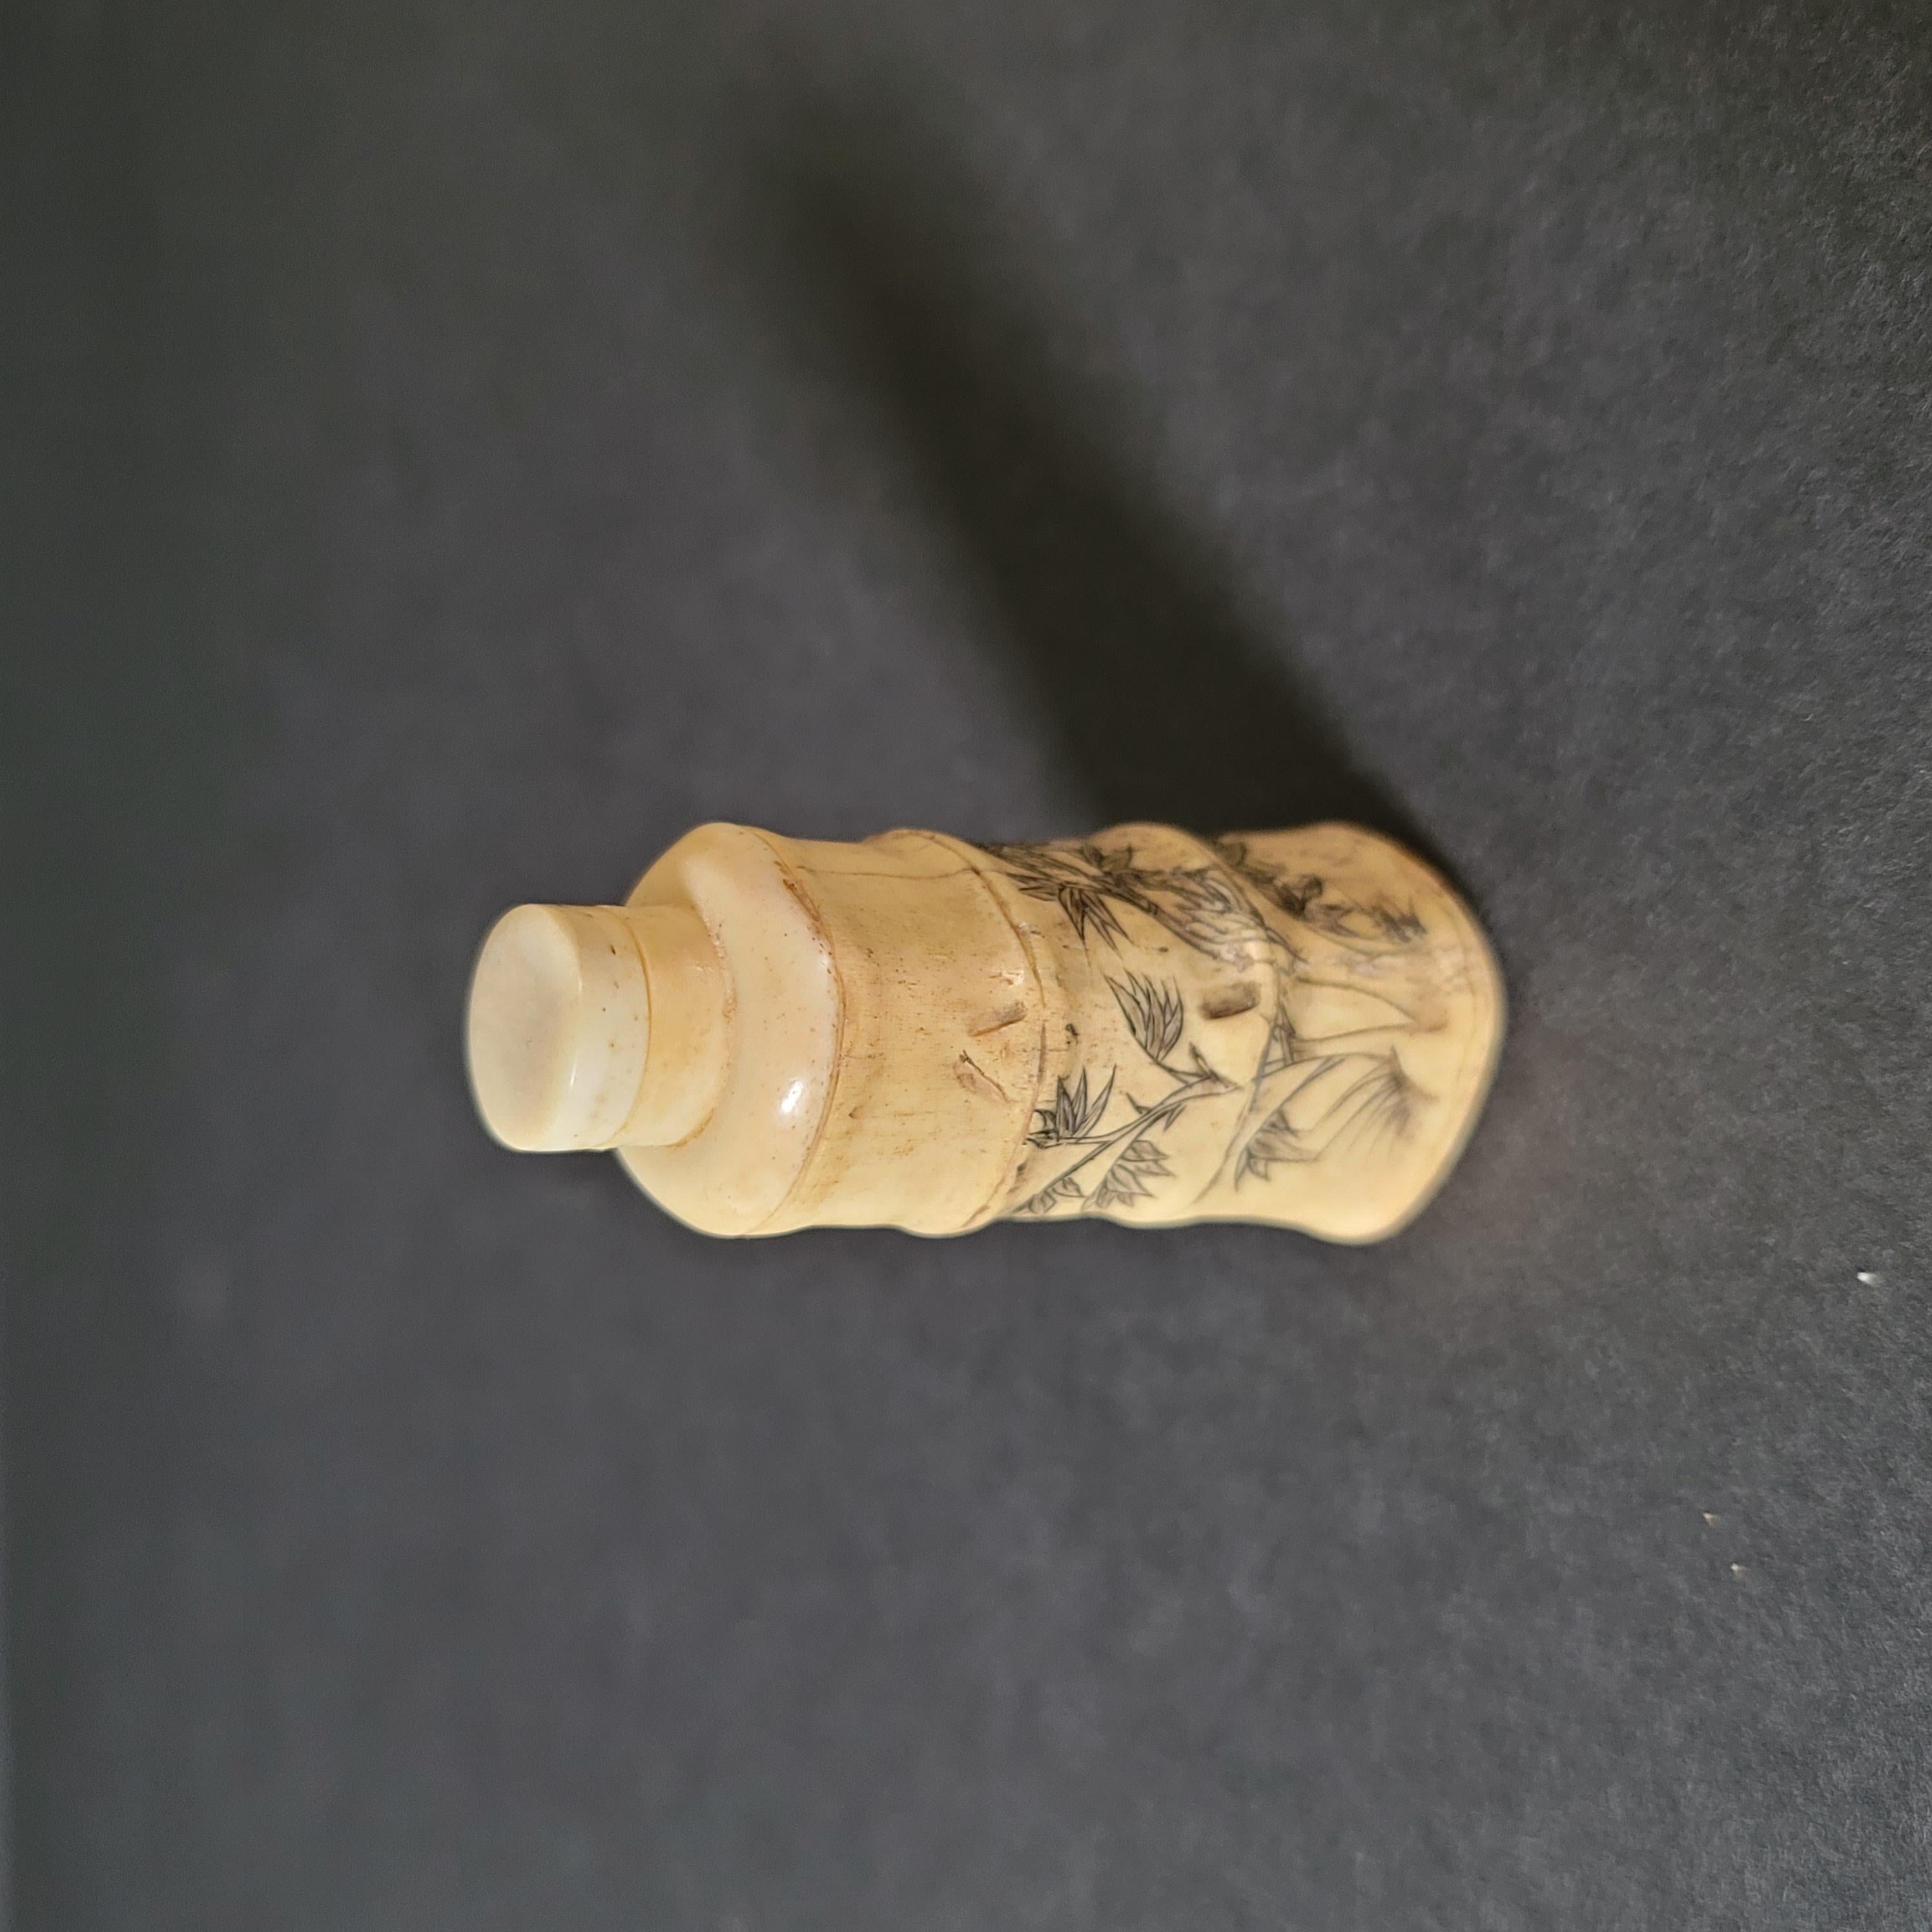 Presenting an astonishing Japanese Antique Carved Bone bamboo-form snuff bottle, museum quality.

Dimension: 2.5